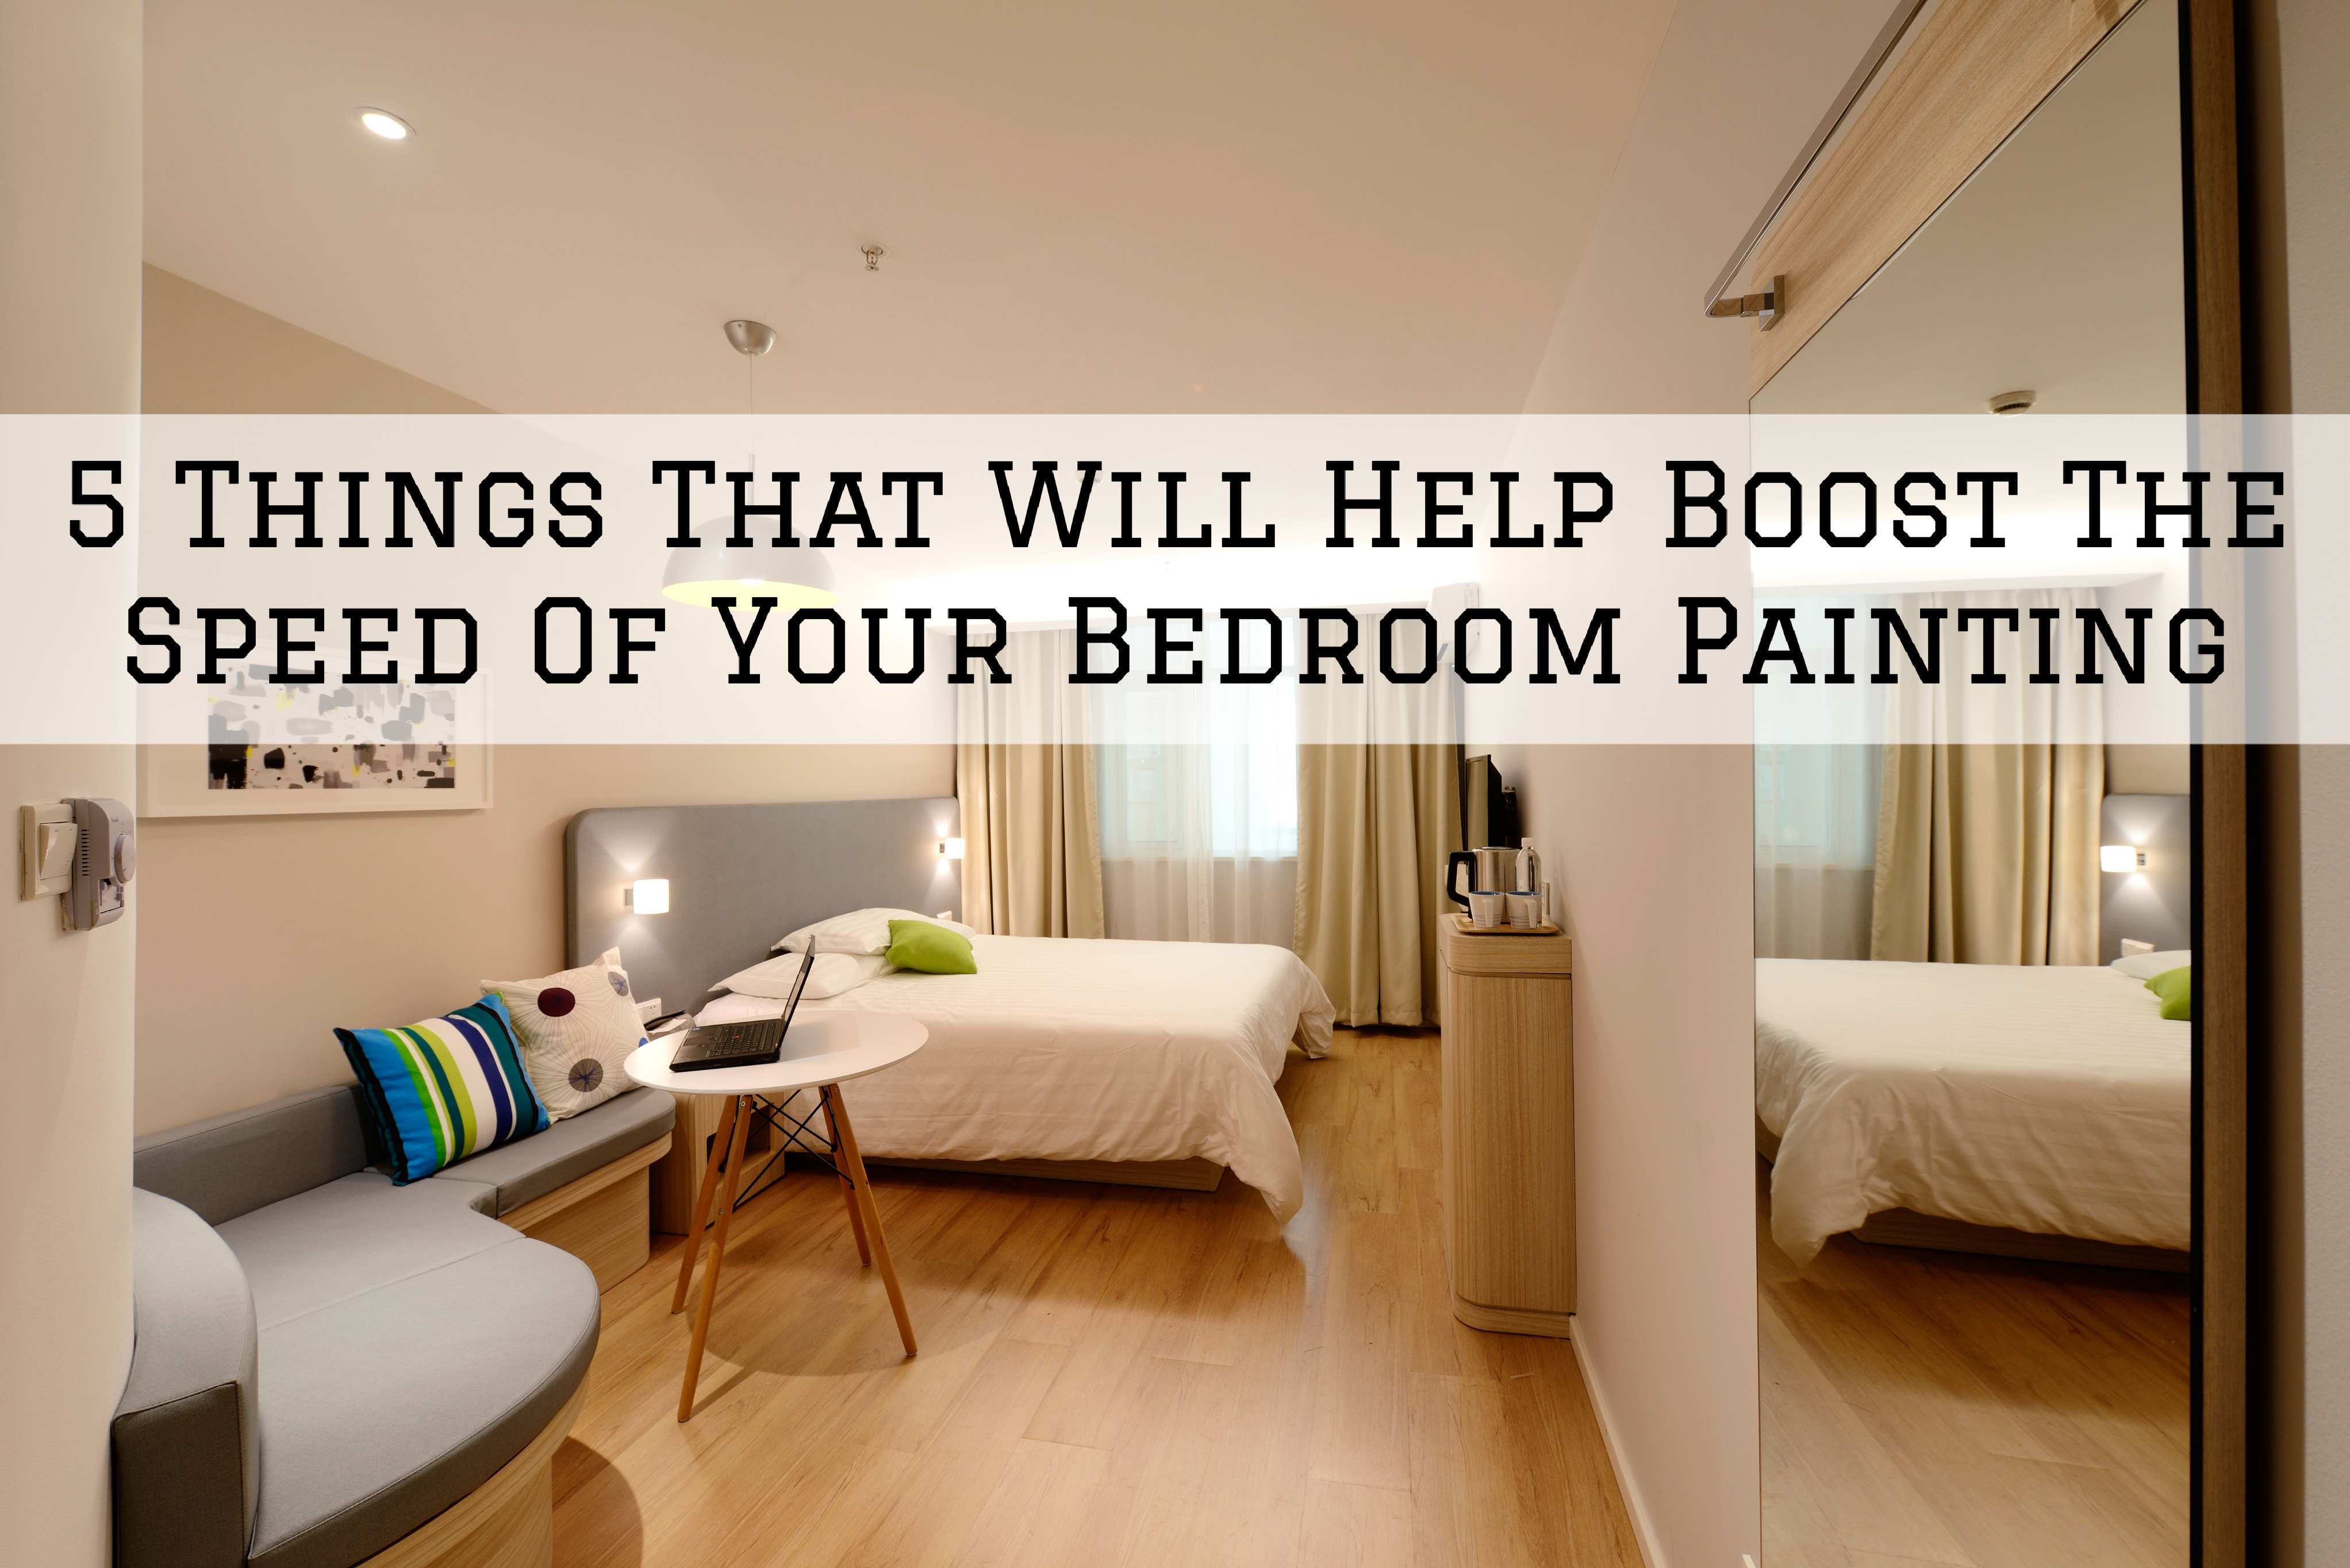 5 Things That Will Help Boost The Speed Of Your Bedroom Painting in Ottawa, Ontario